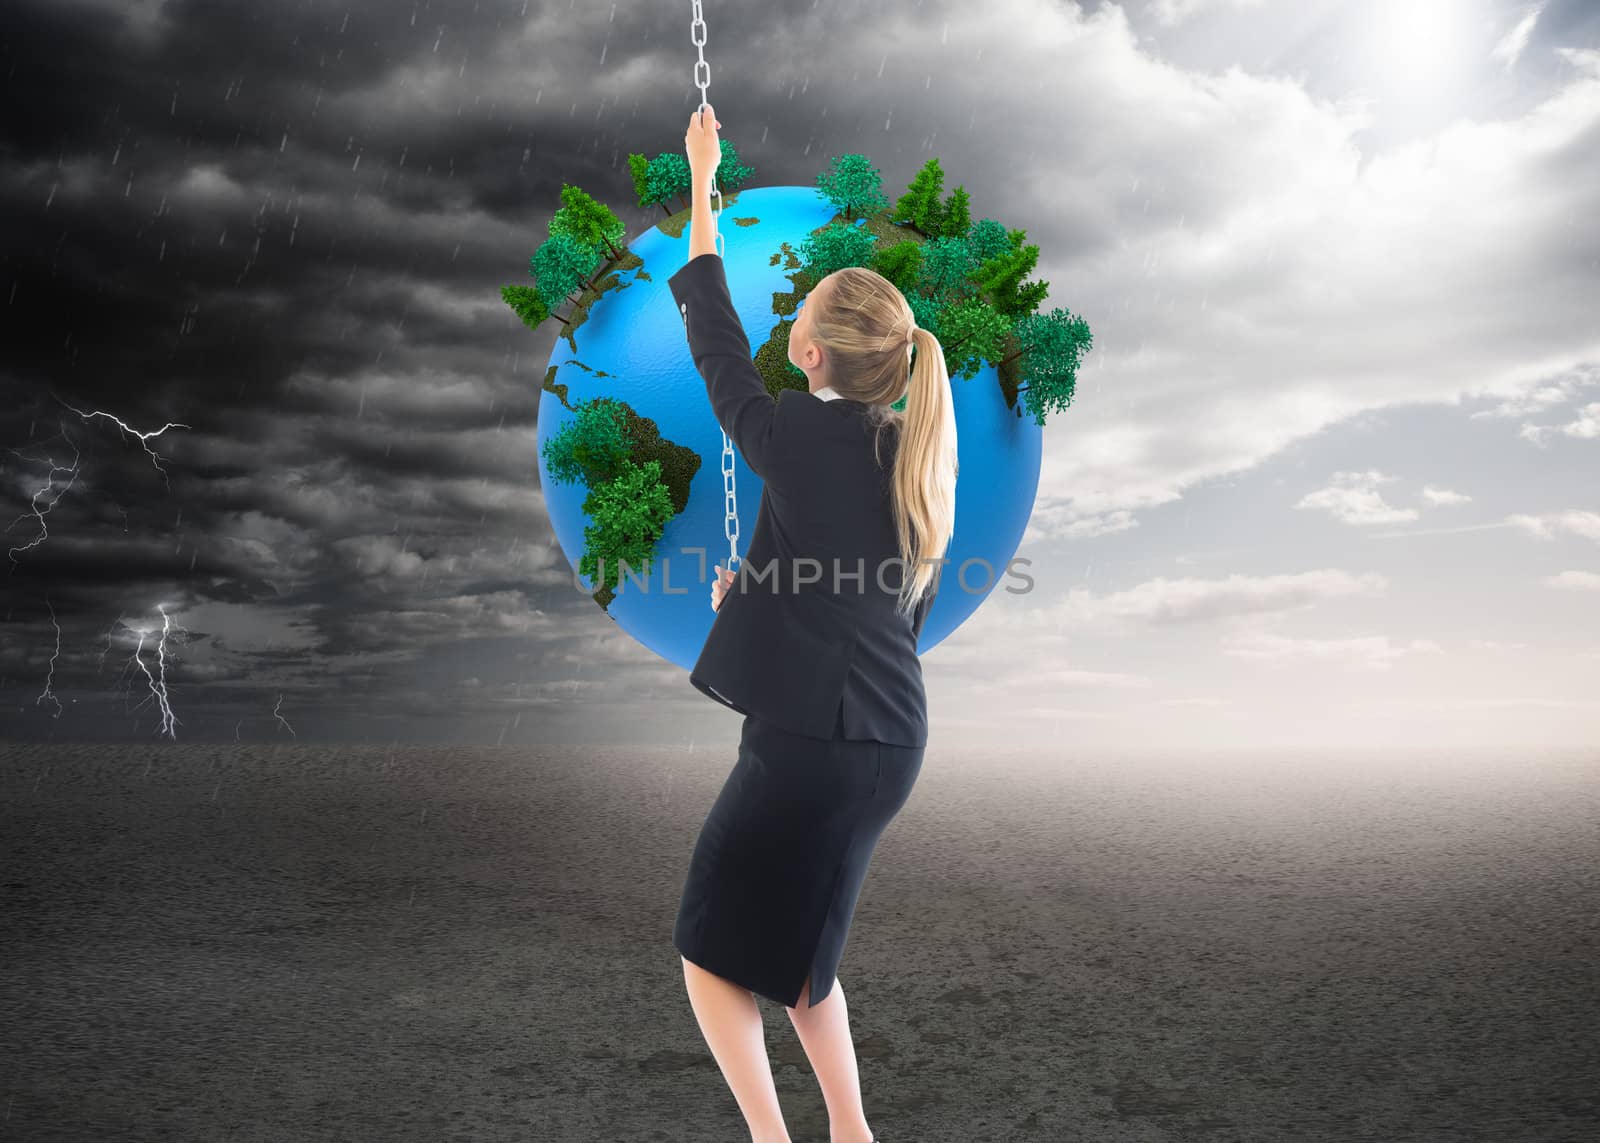 Composite image of businesswoman pulling a chain by Wavebreakmedia